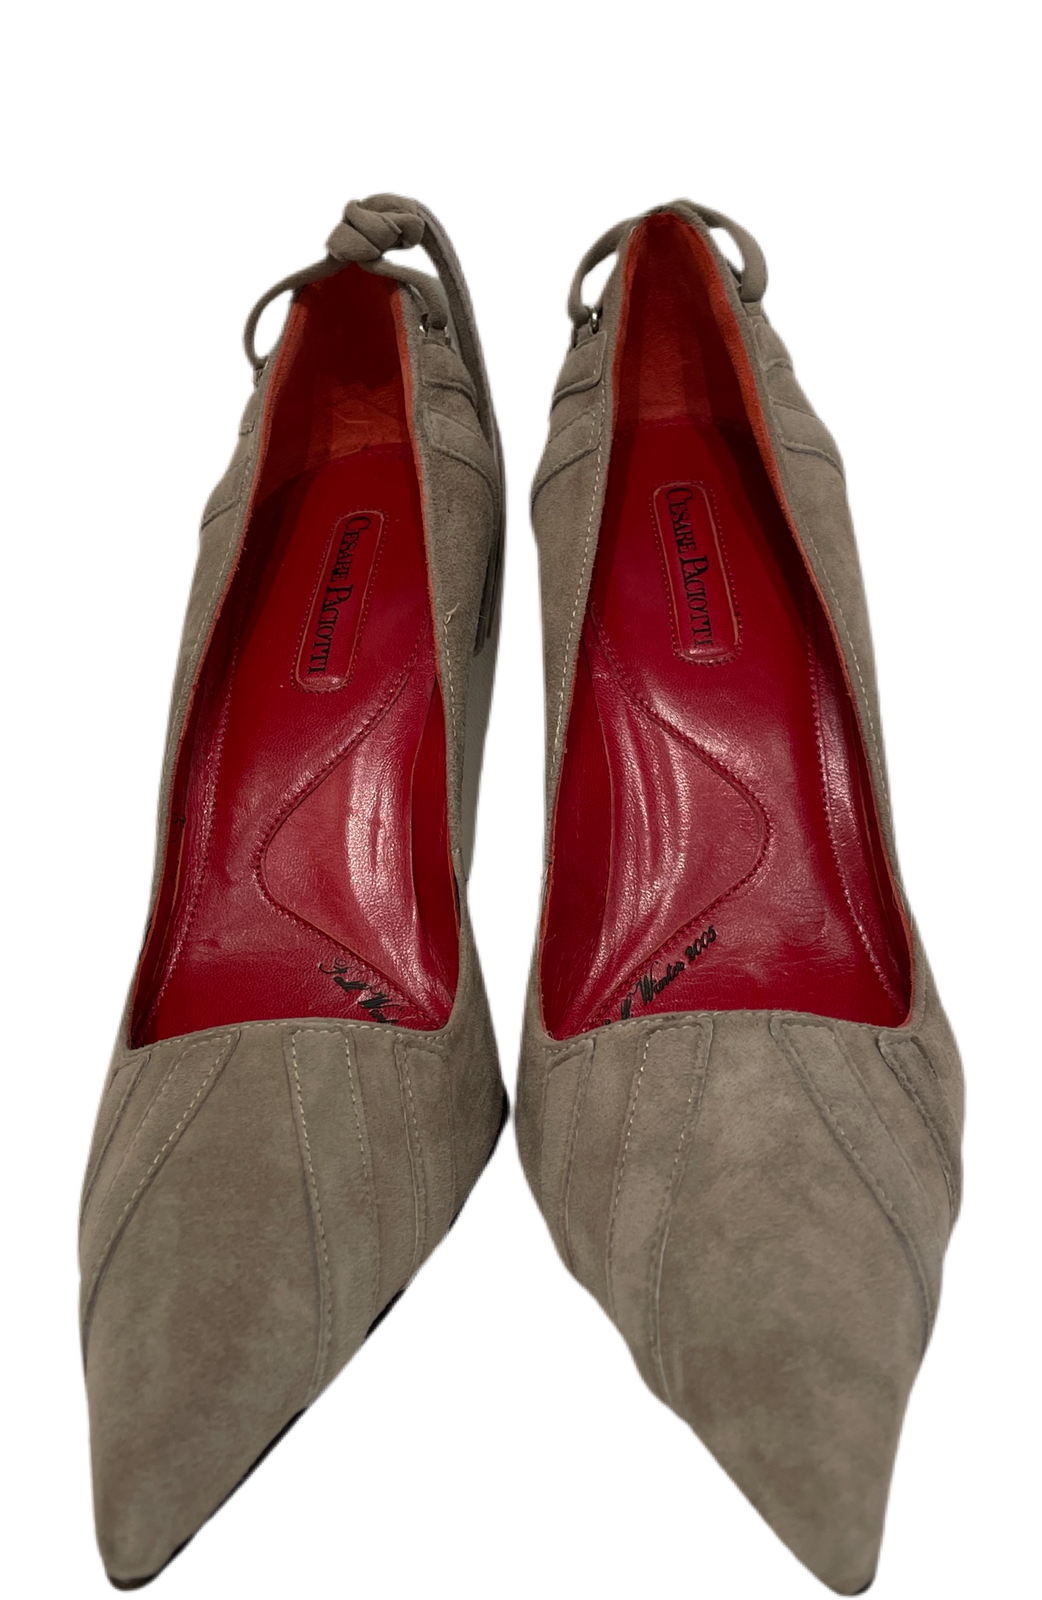 CESARE PACIOTTI Suede Pointed Toe Pumps Taupe Size 37